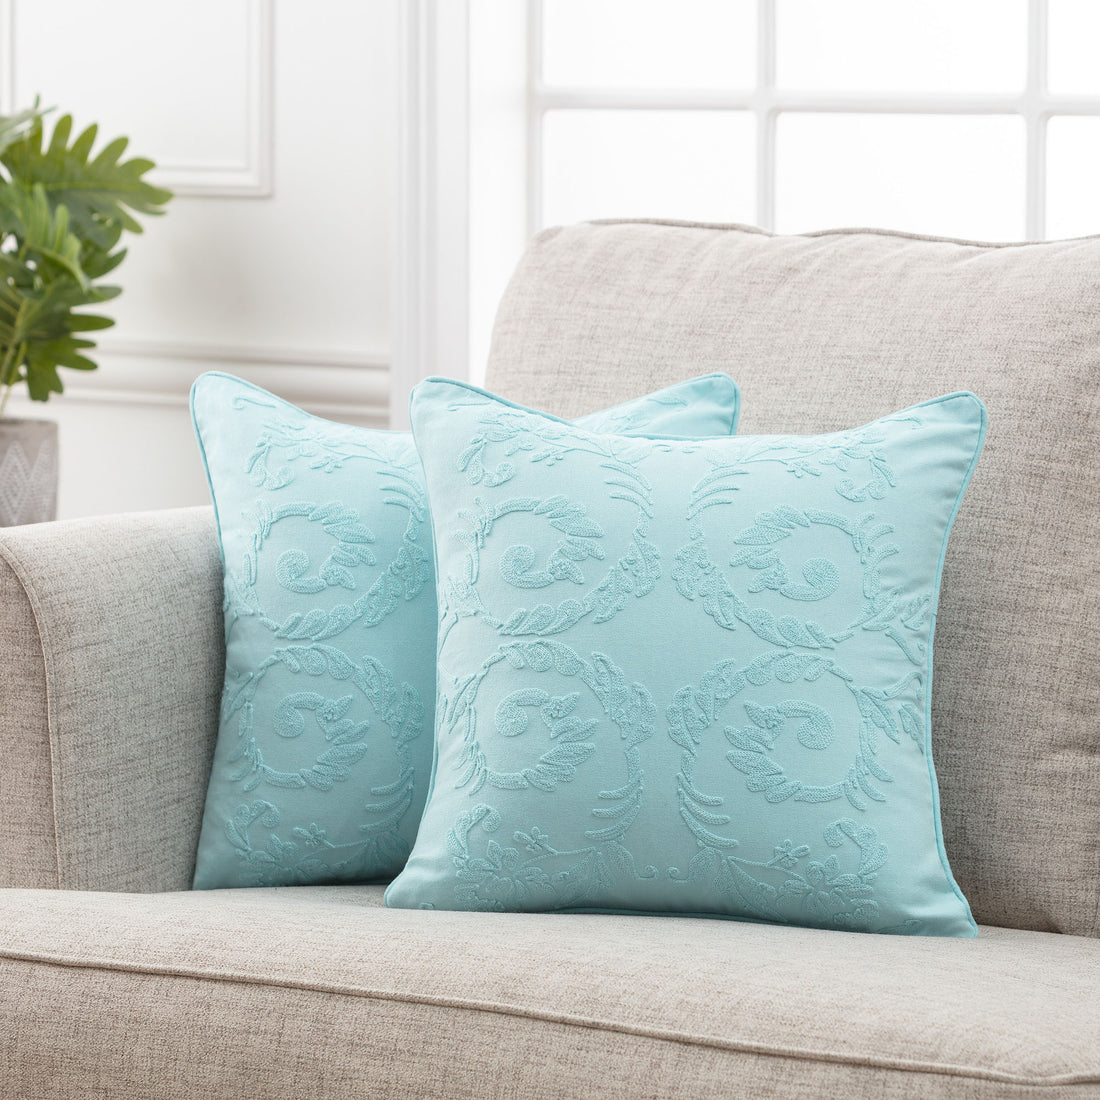 Petunia Embroidered Throw Pillow Covers